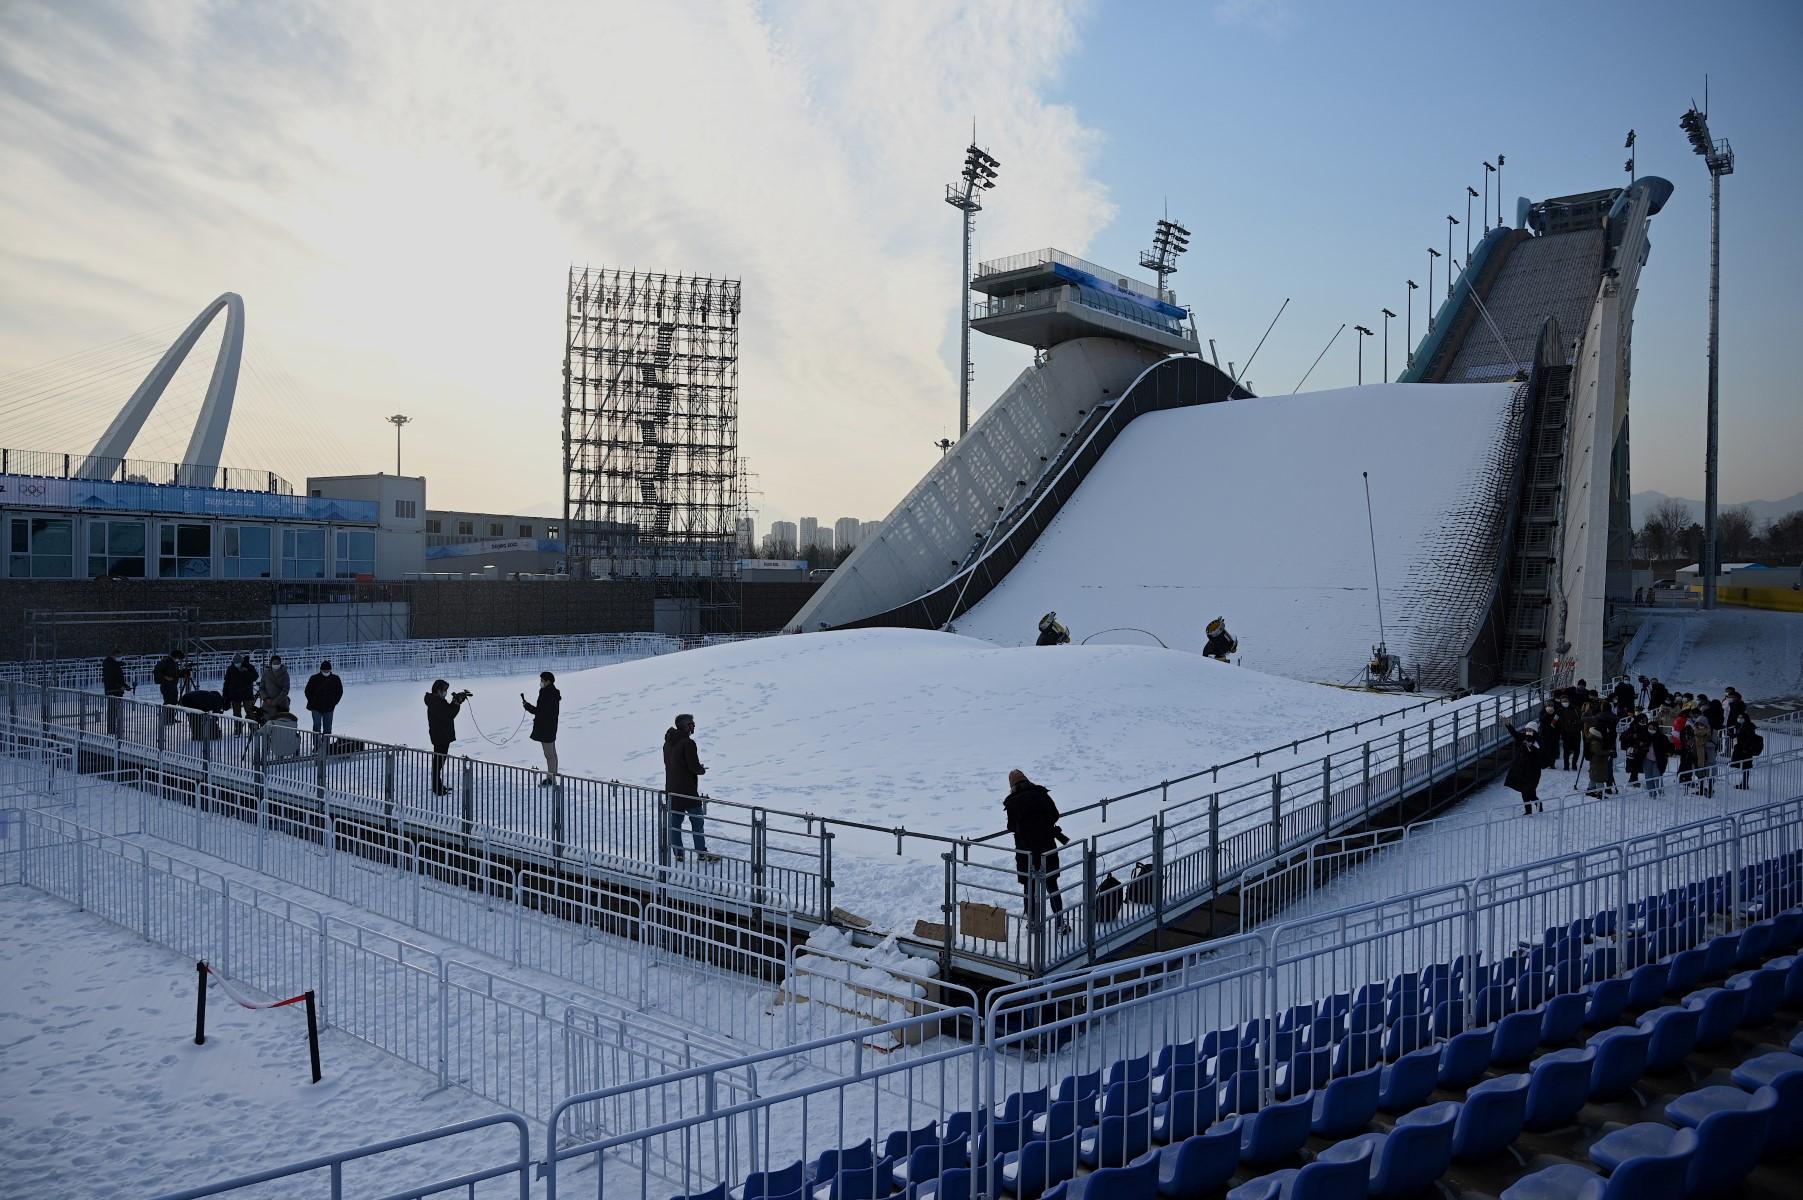 Journalists work in front of the Shougang Big Air venue, which will host the big air freestyle skiing and snowboarding competitions at the Beijing 2022 Winter Olympics, at the Shougang Park in Beijing on Dec 15. Photo: AFP